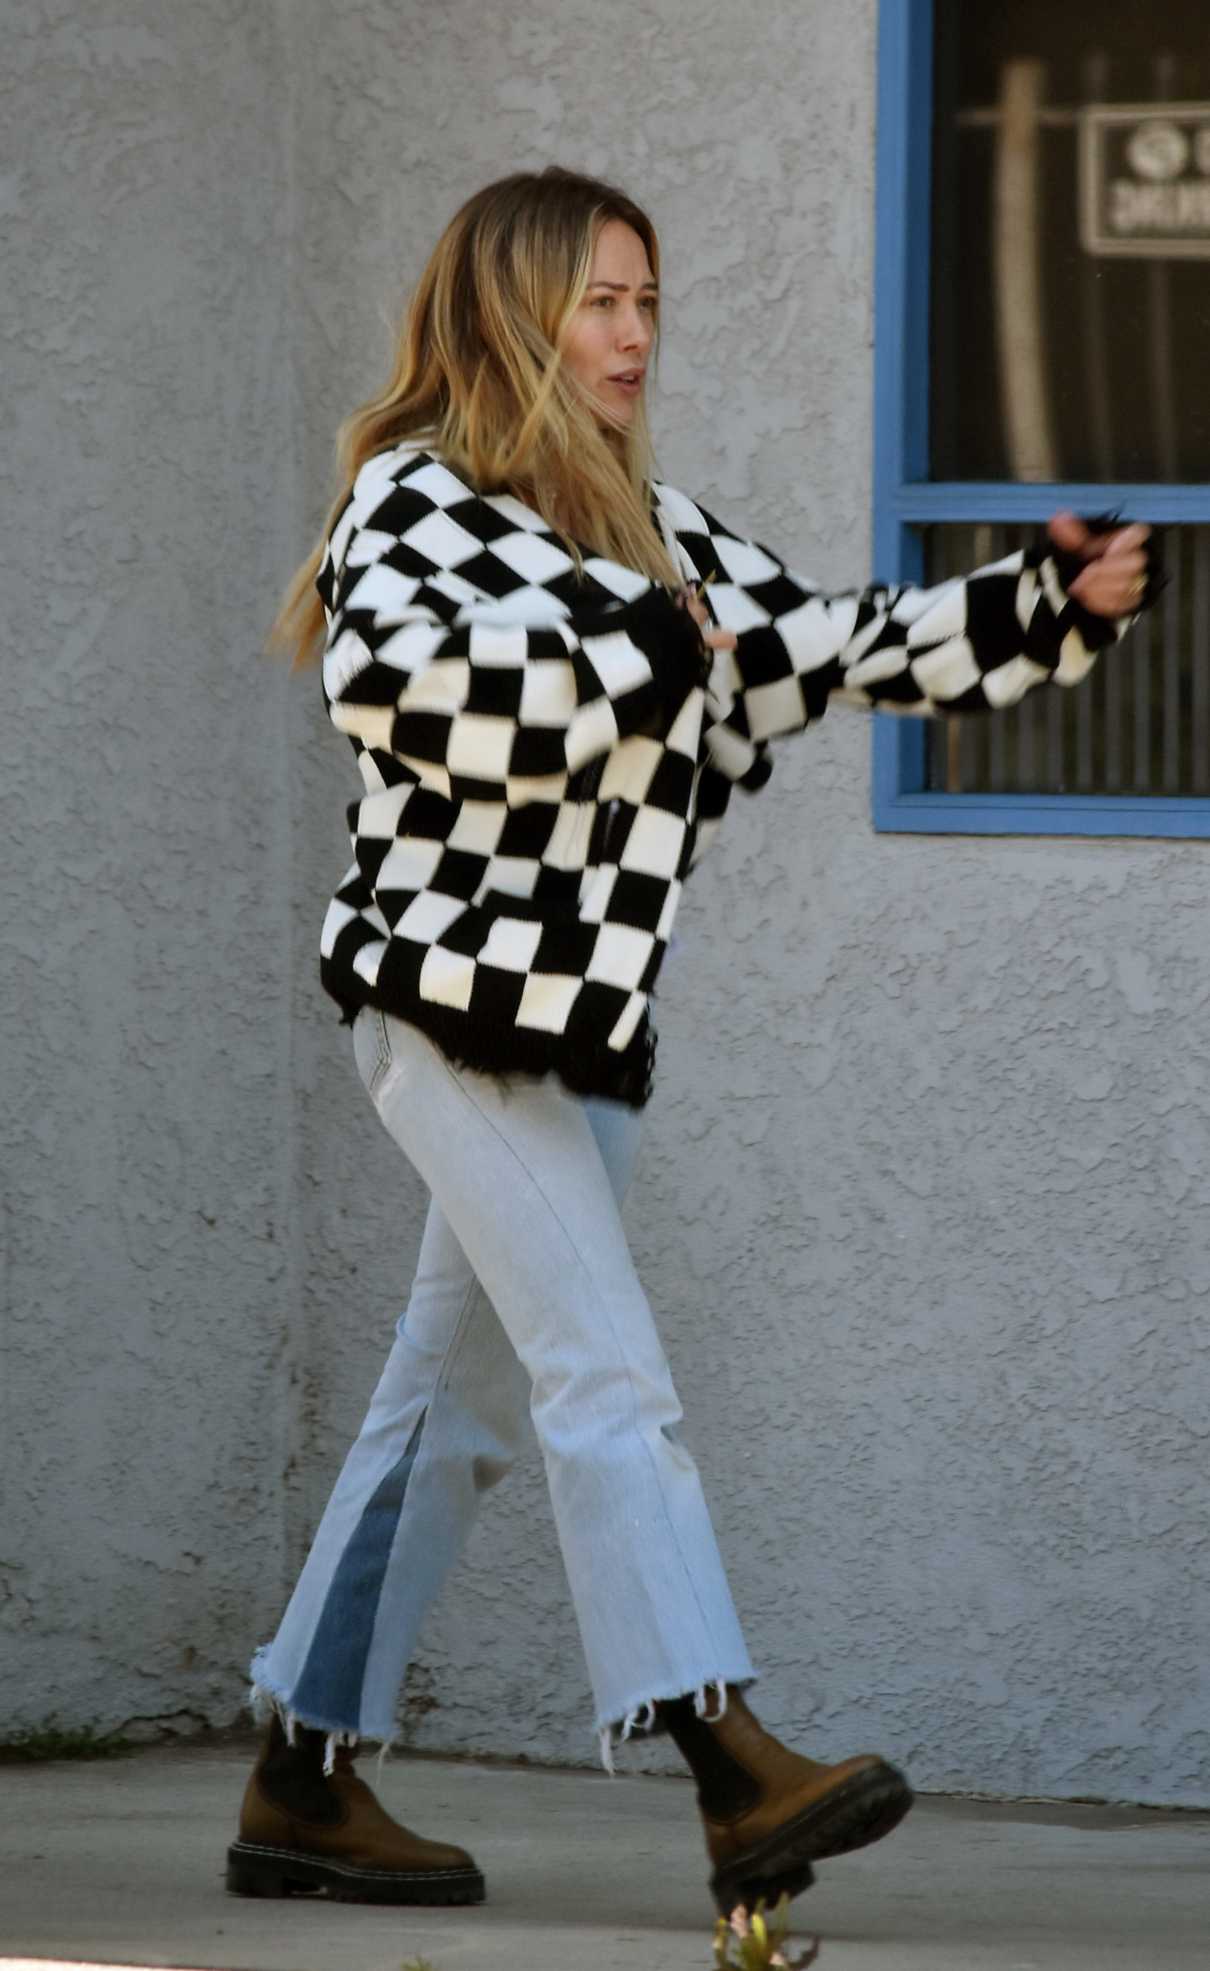 Hilary Duff in a Checked Cardigan